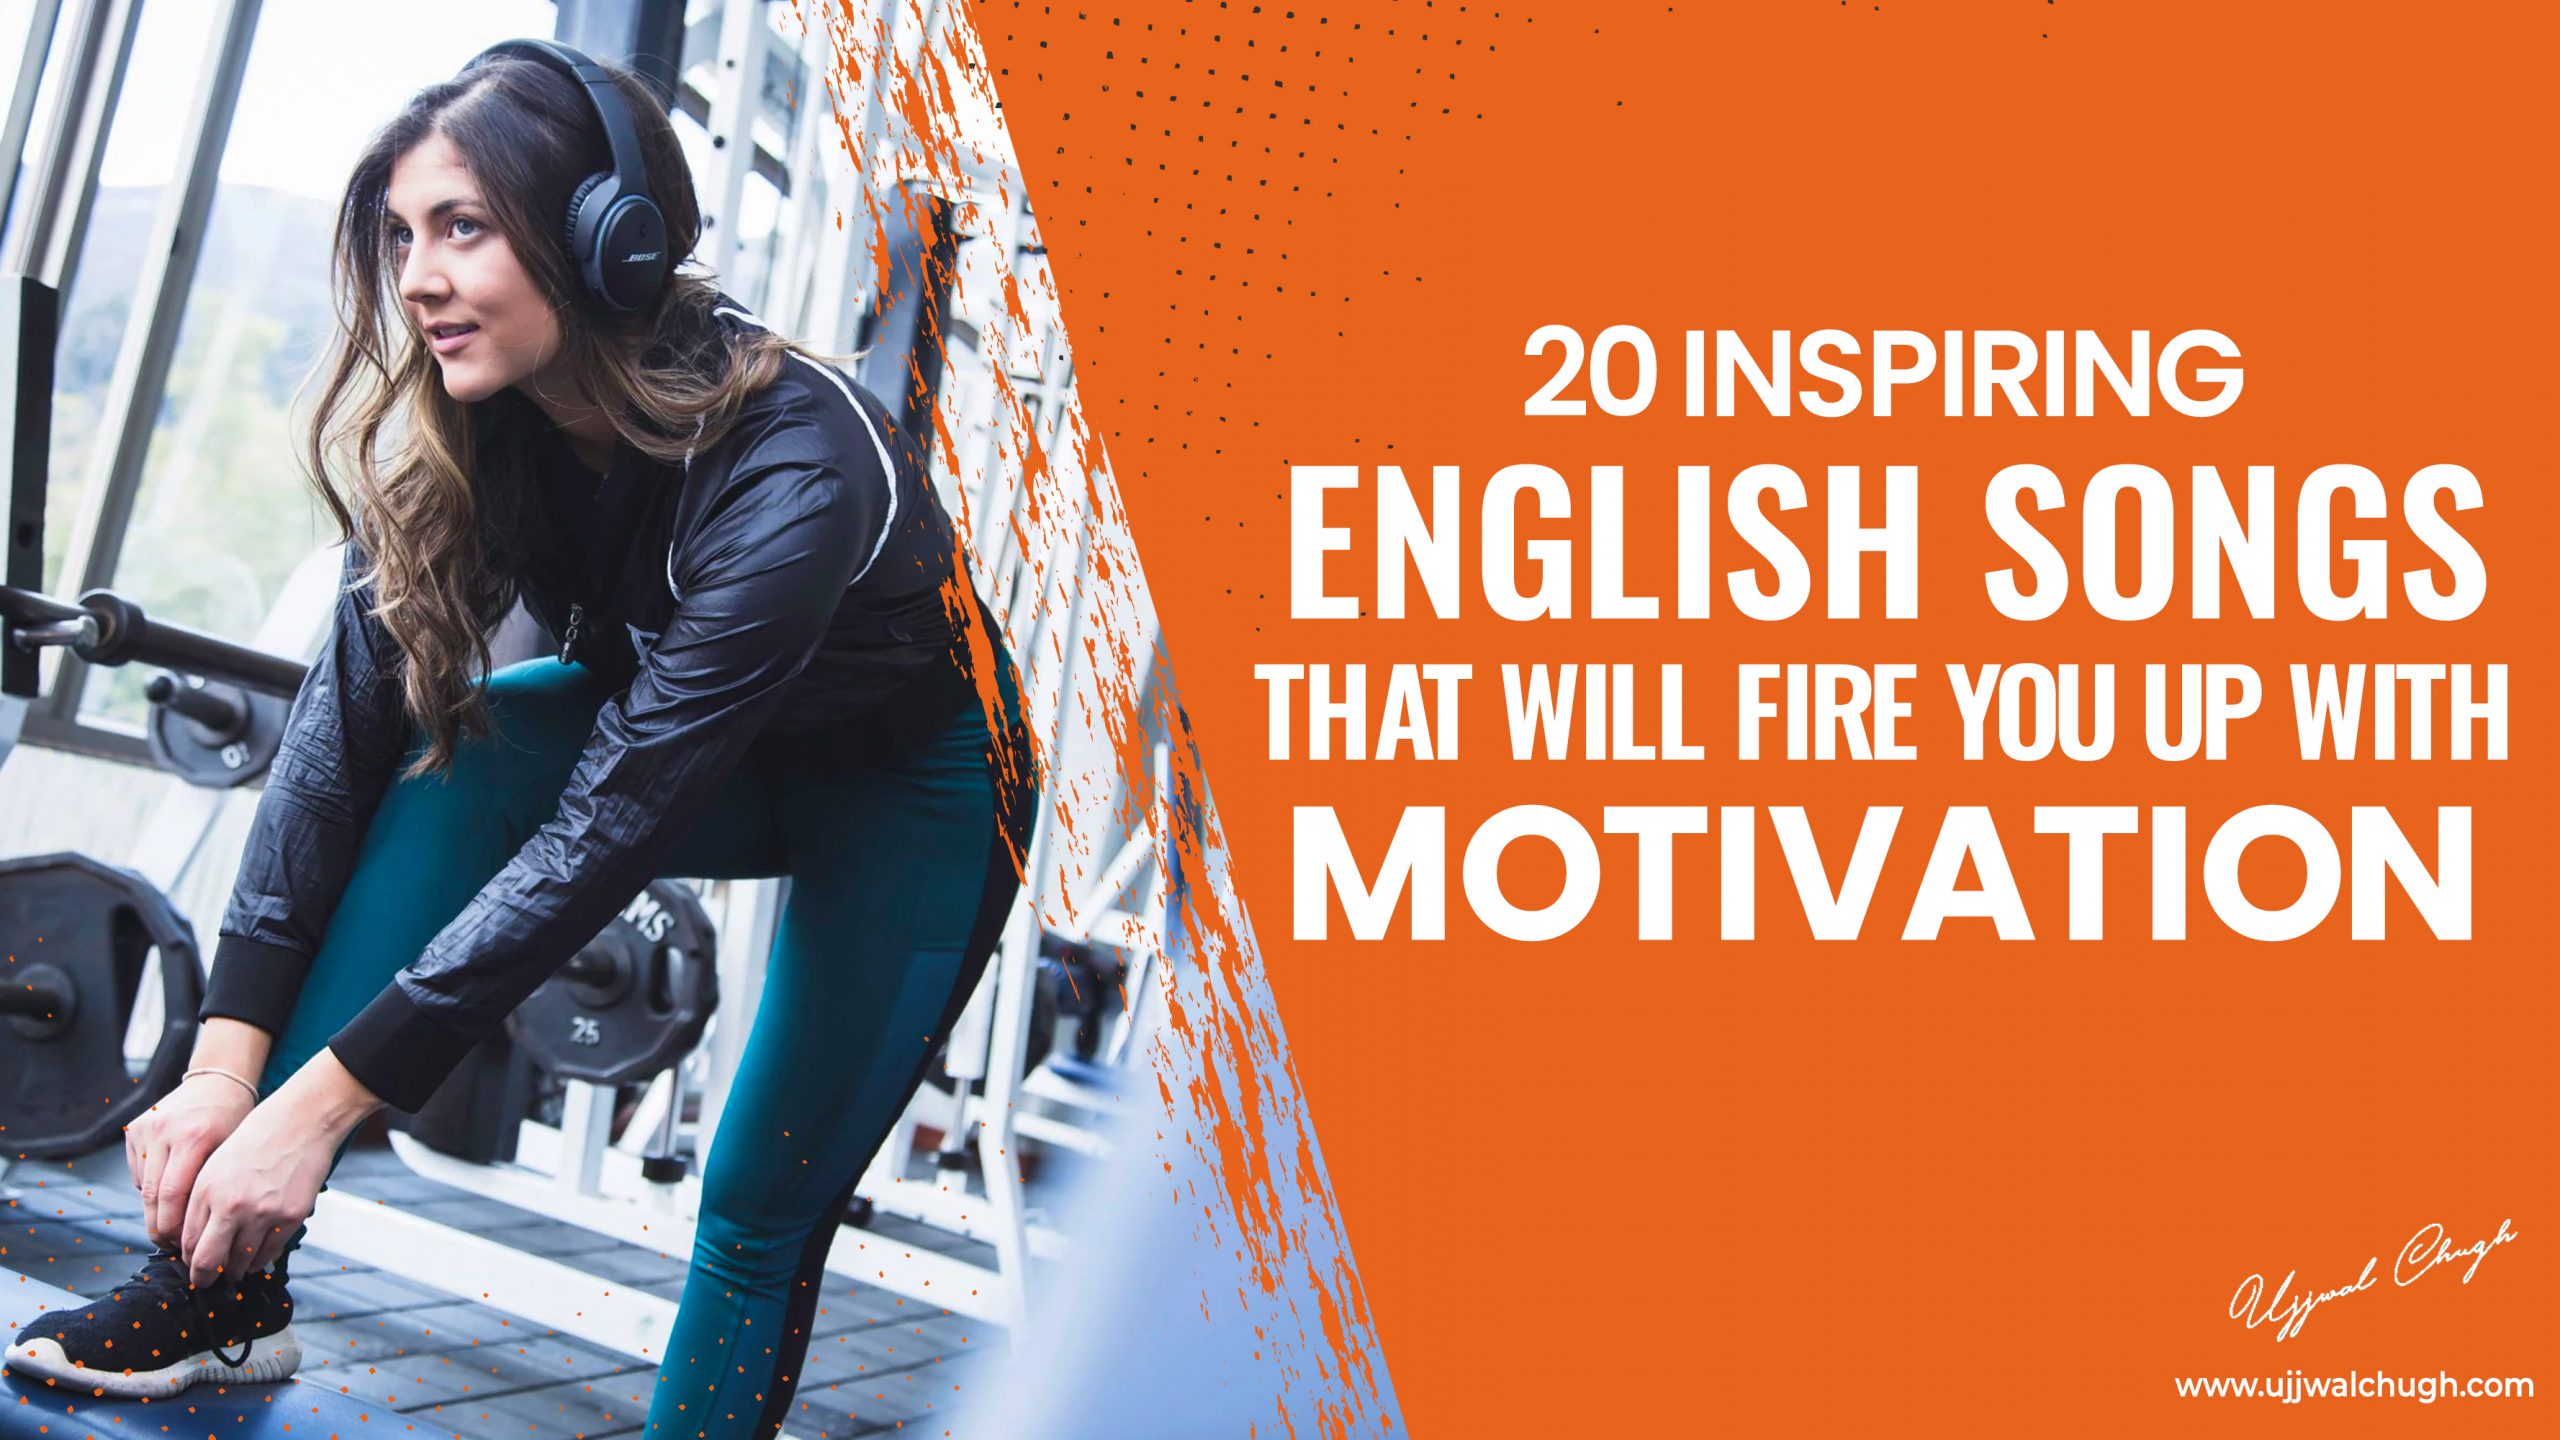 20 Inspiring English Songs That Will Fire You Up With Motivation